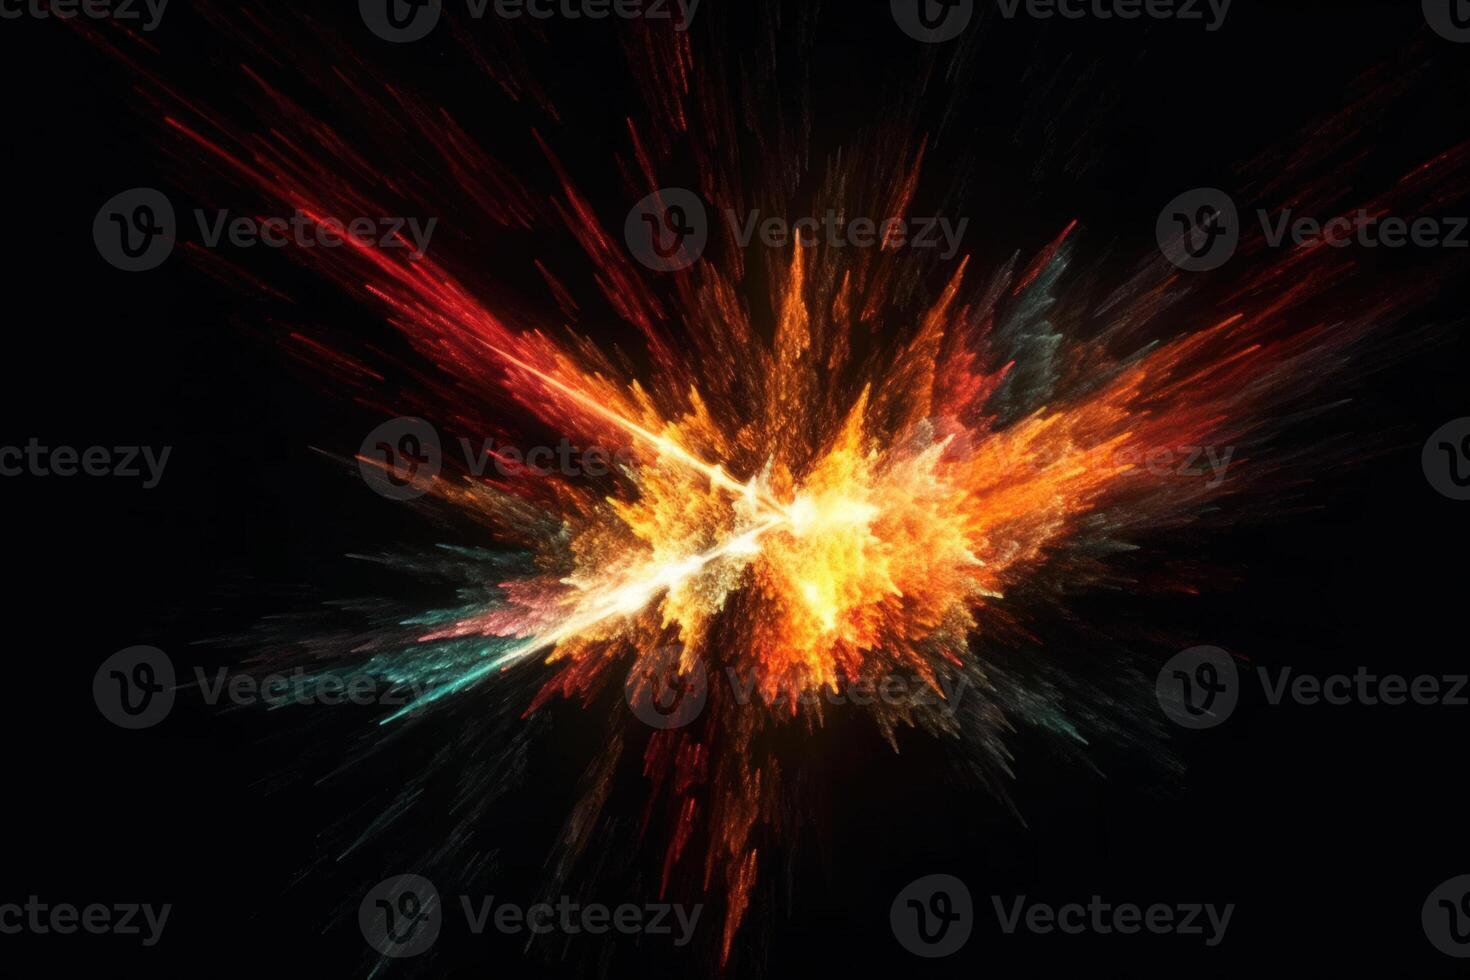 colorful explosion paint in dark photo